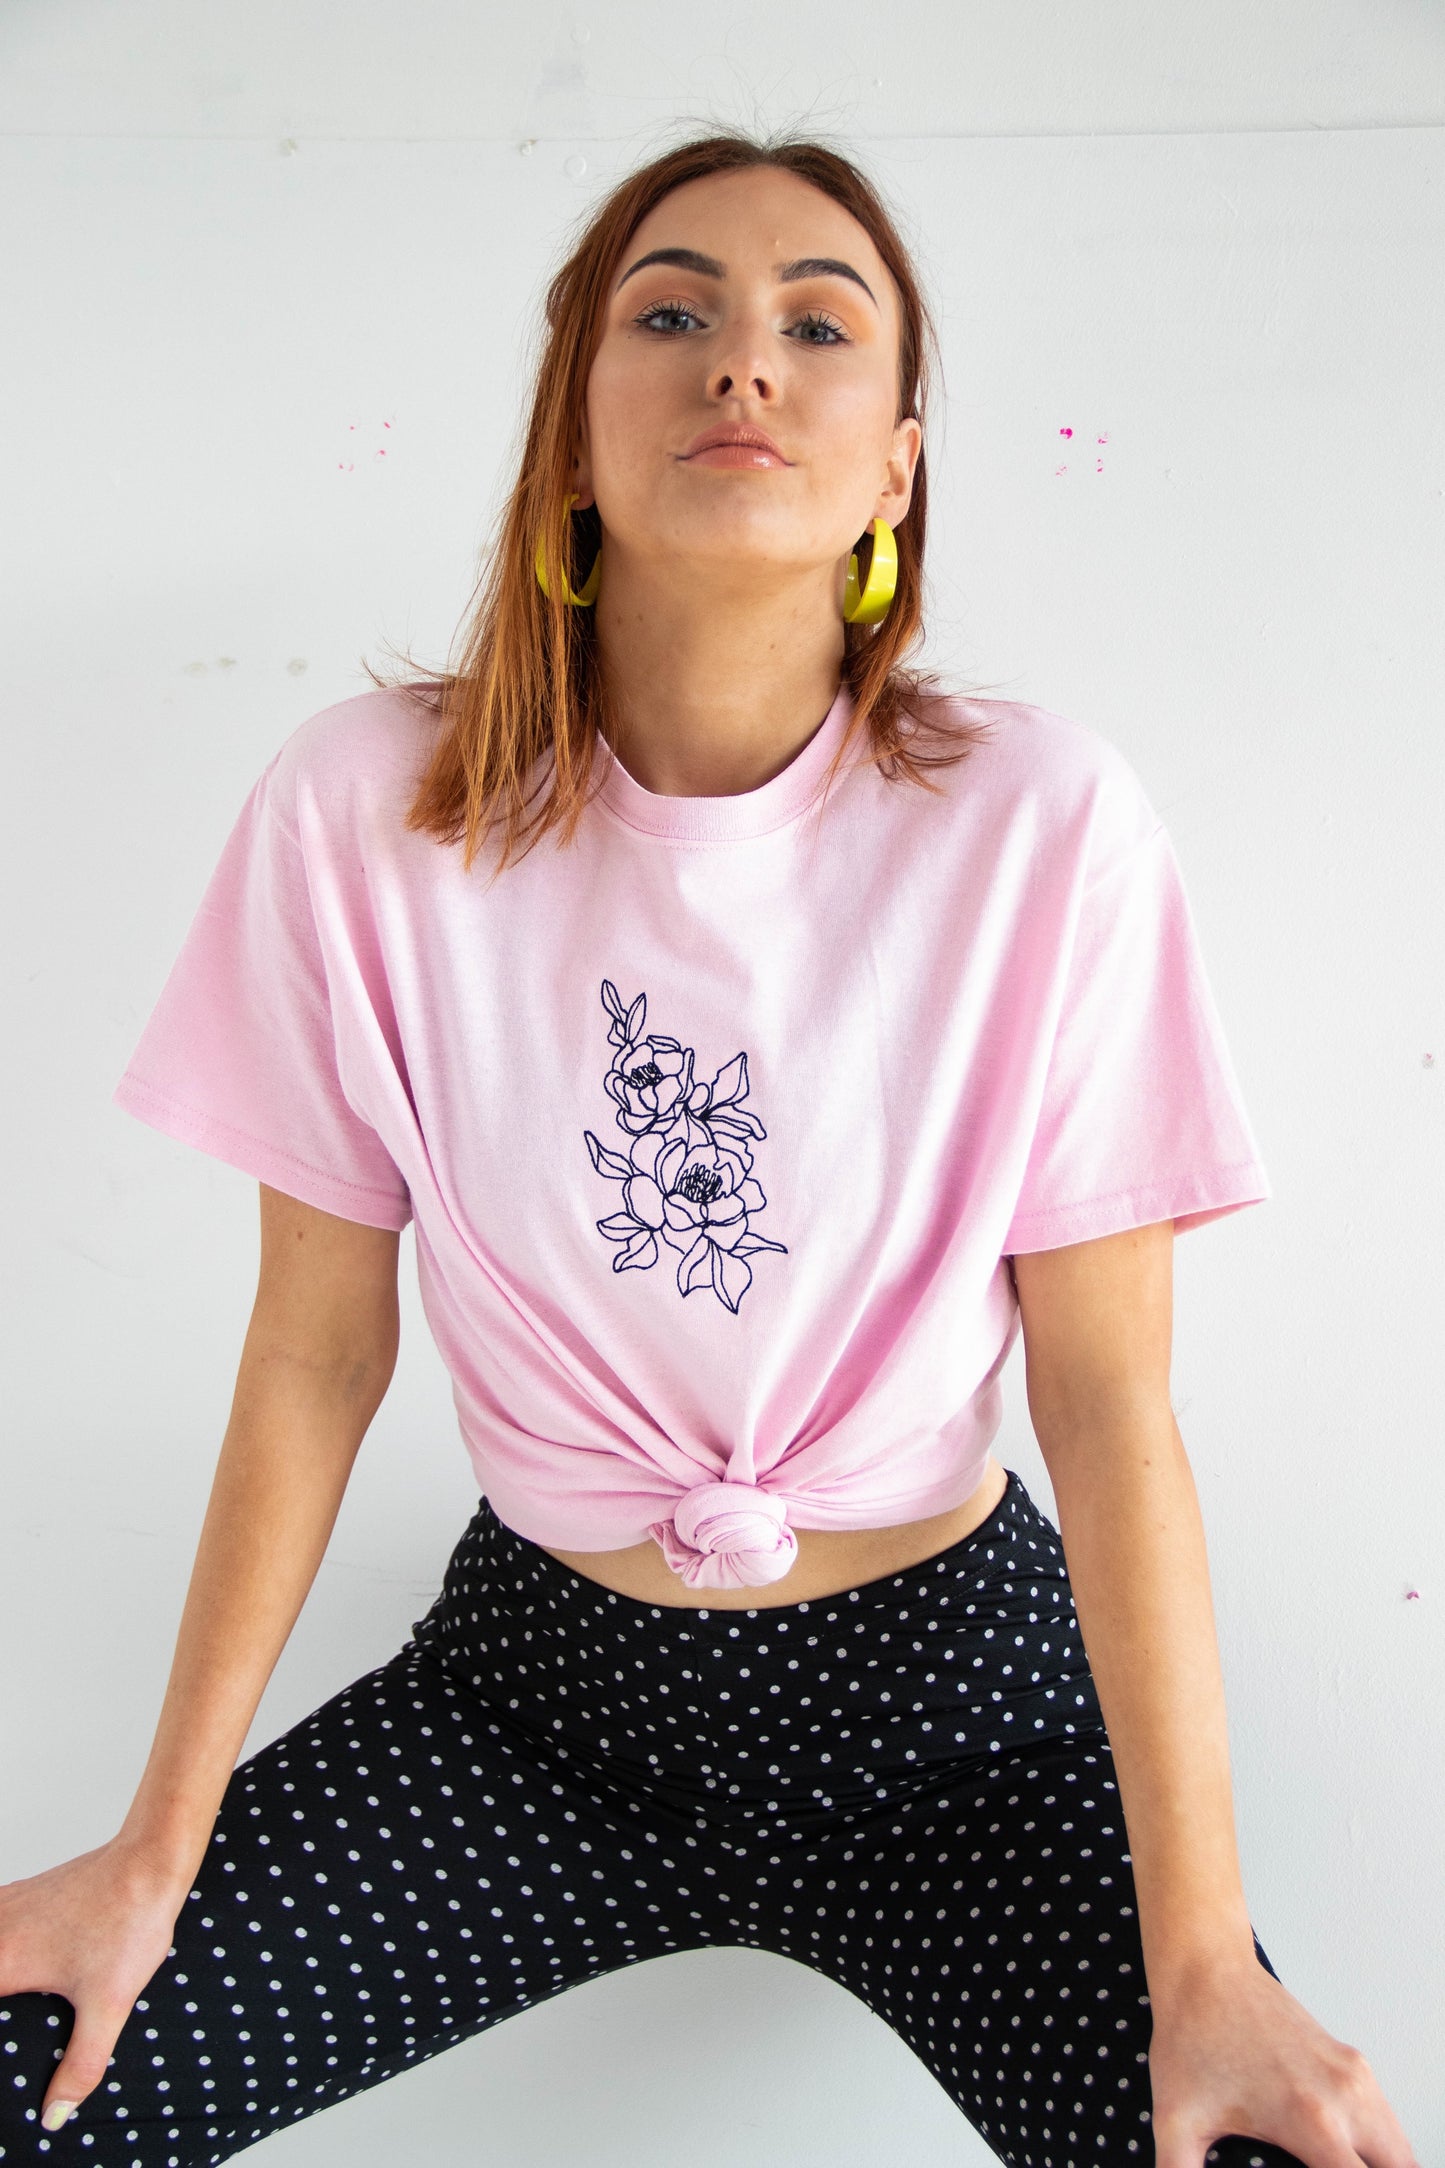 Floral Embroidered Tee